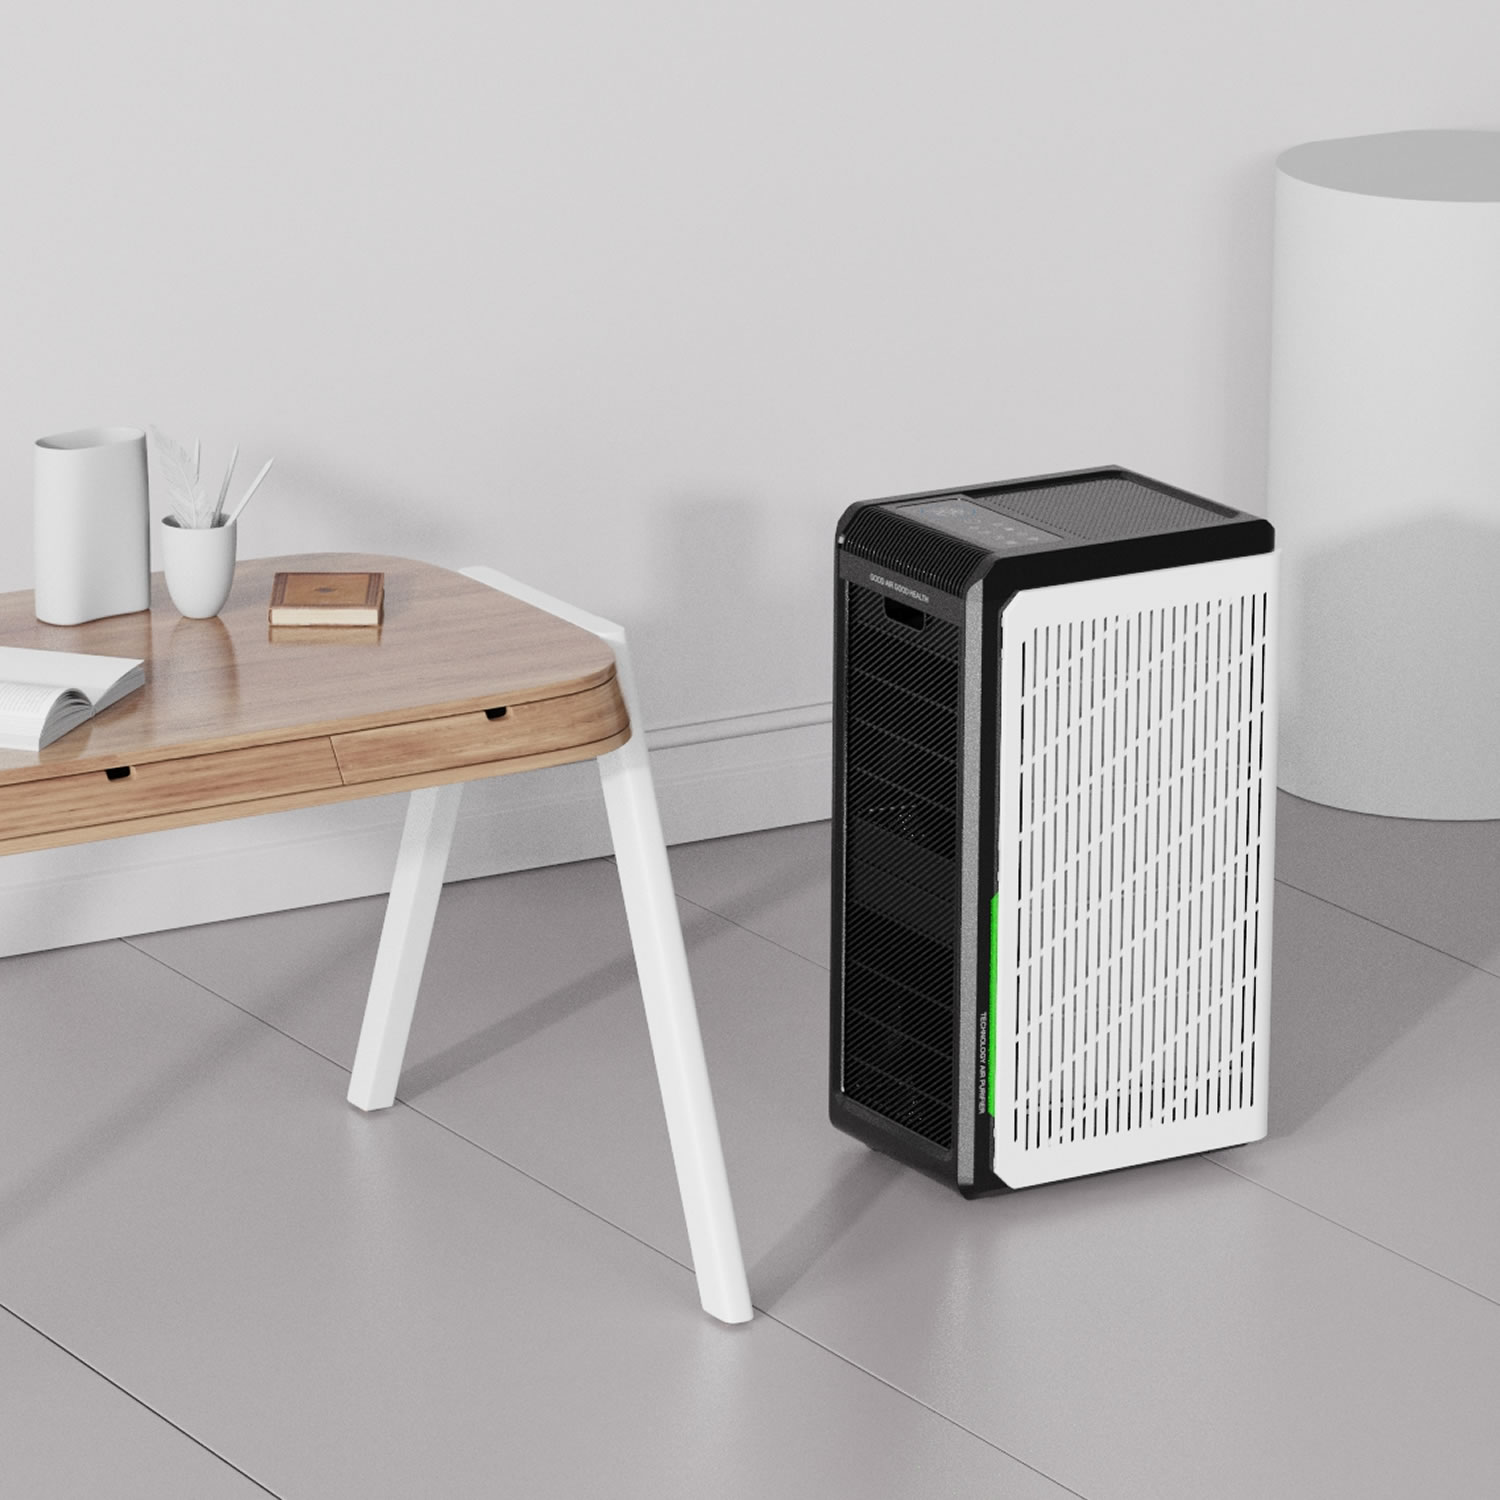 What are the advantages of New arrival medical grade air purifier